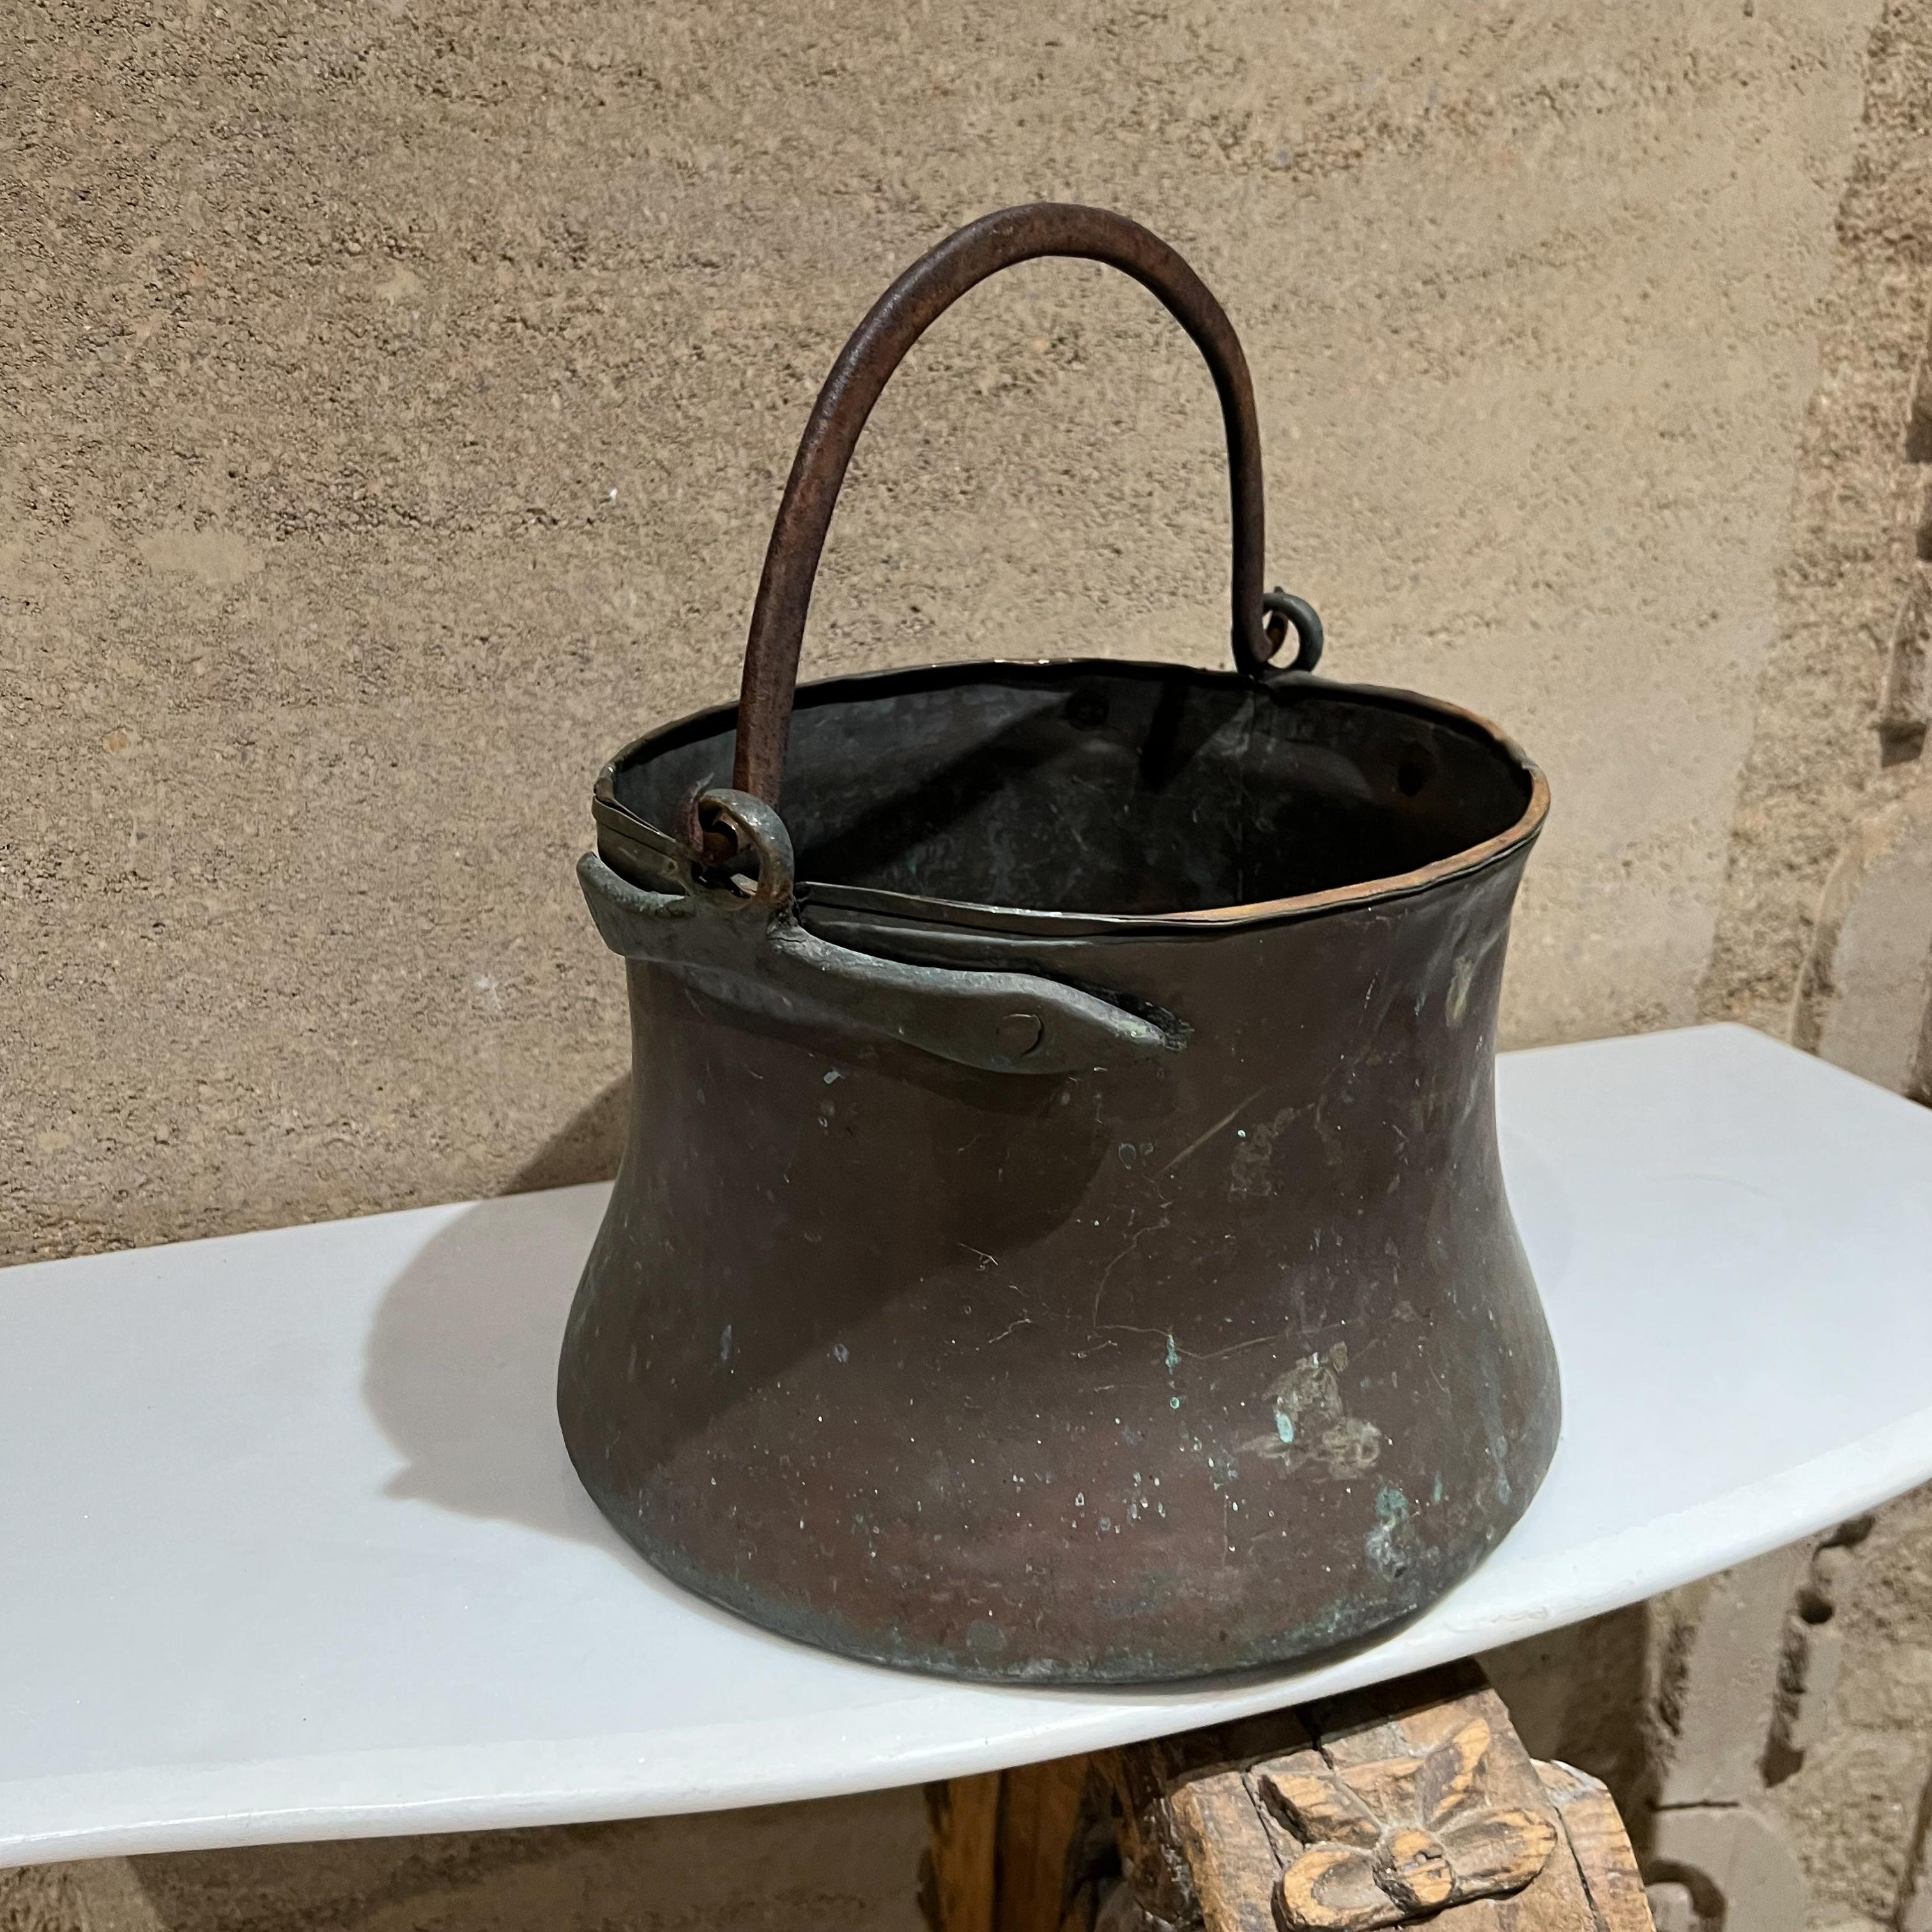 Farm bucket
Antique Farmhouse Rustic Copper Milk Bucket Pail with Carry Handle Wide Bottom
Sculptural design in lovely distress
13.75 tall with handle up, 8.5 tall handle down, diameter bottom 12 x diameter top 10.25
Preowned unrestored original